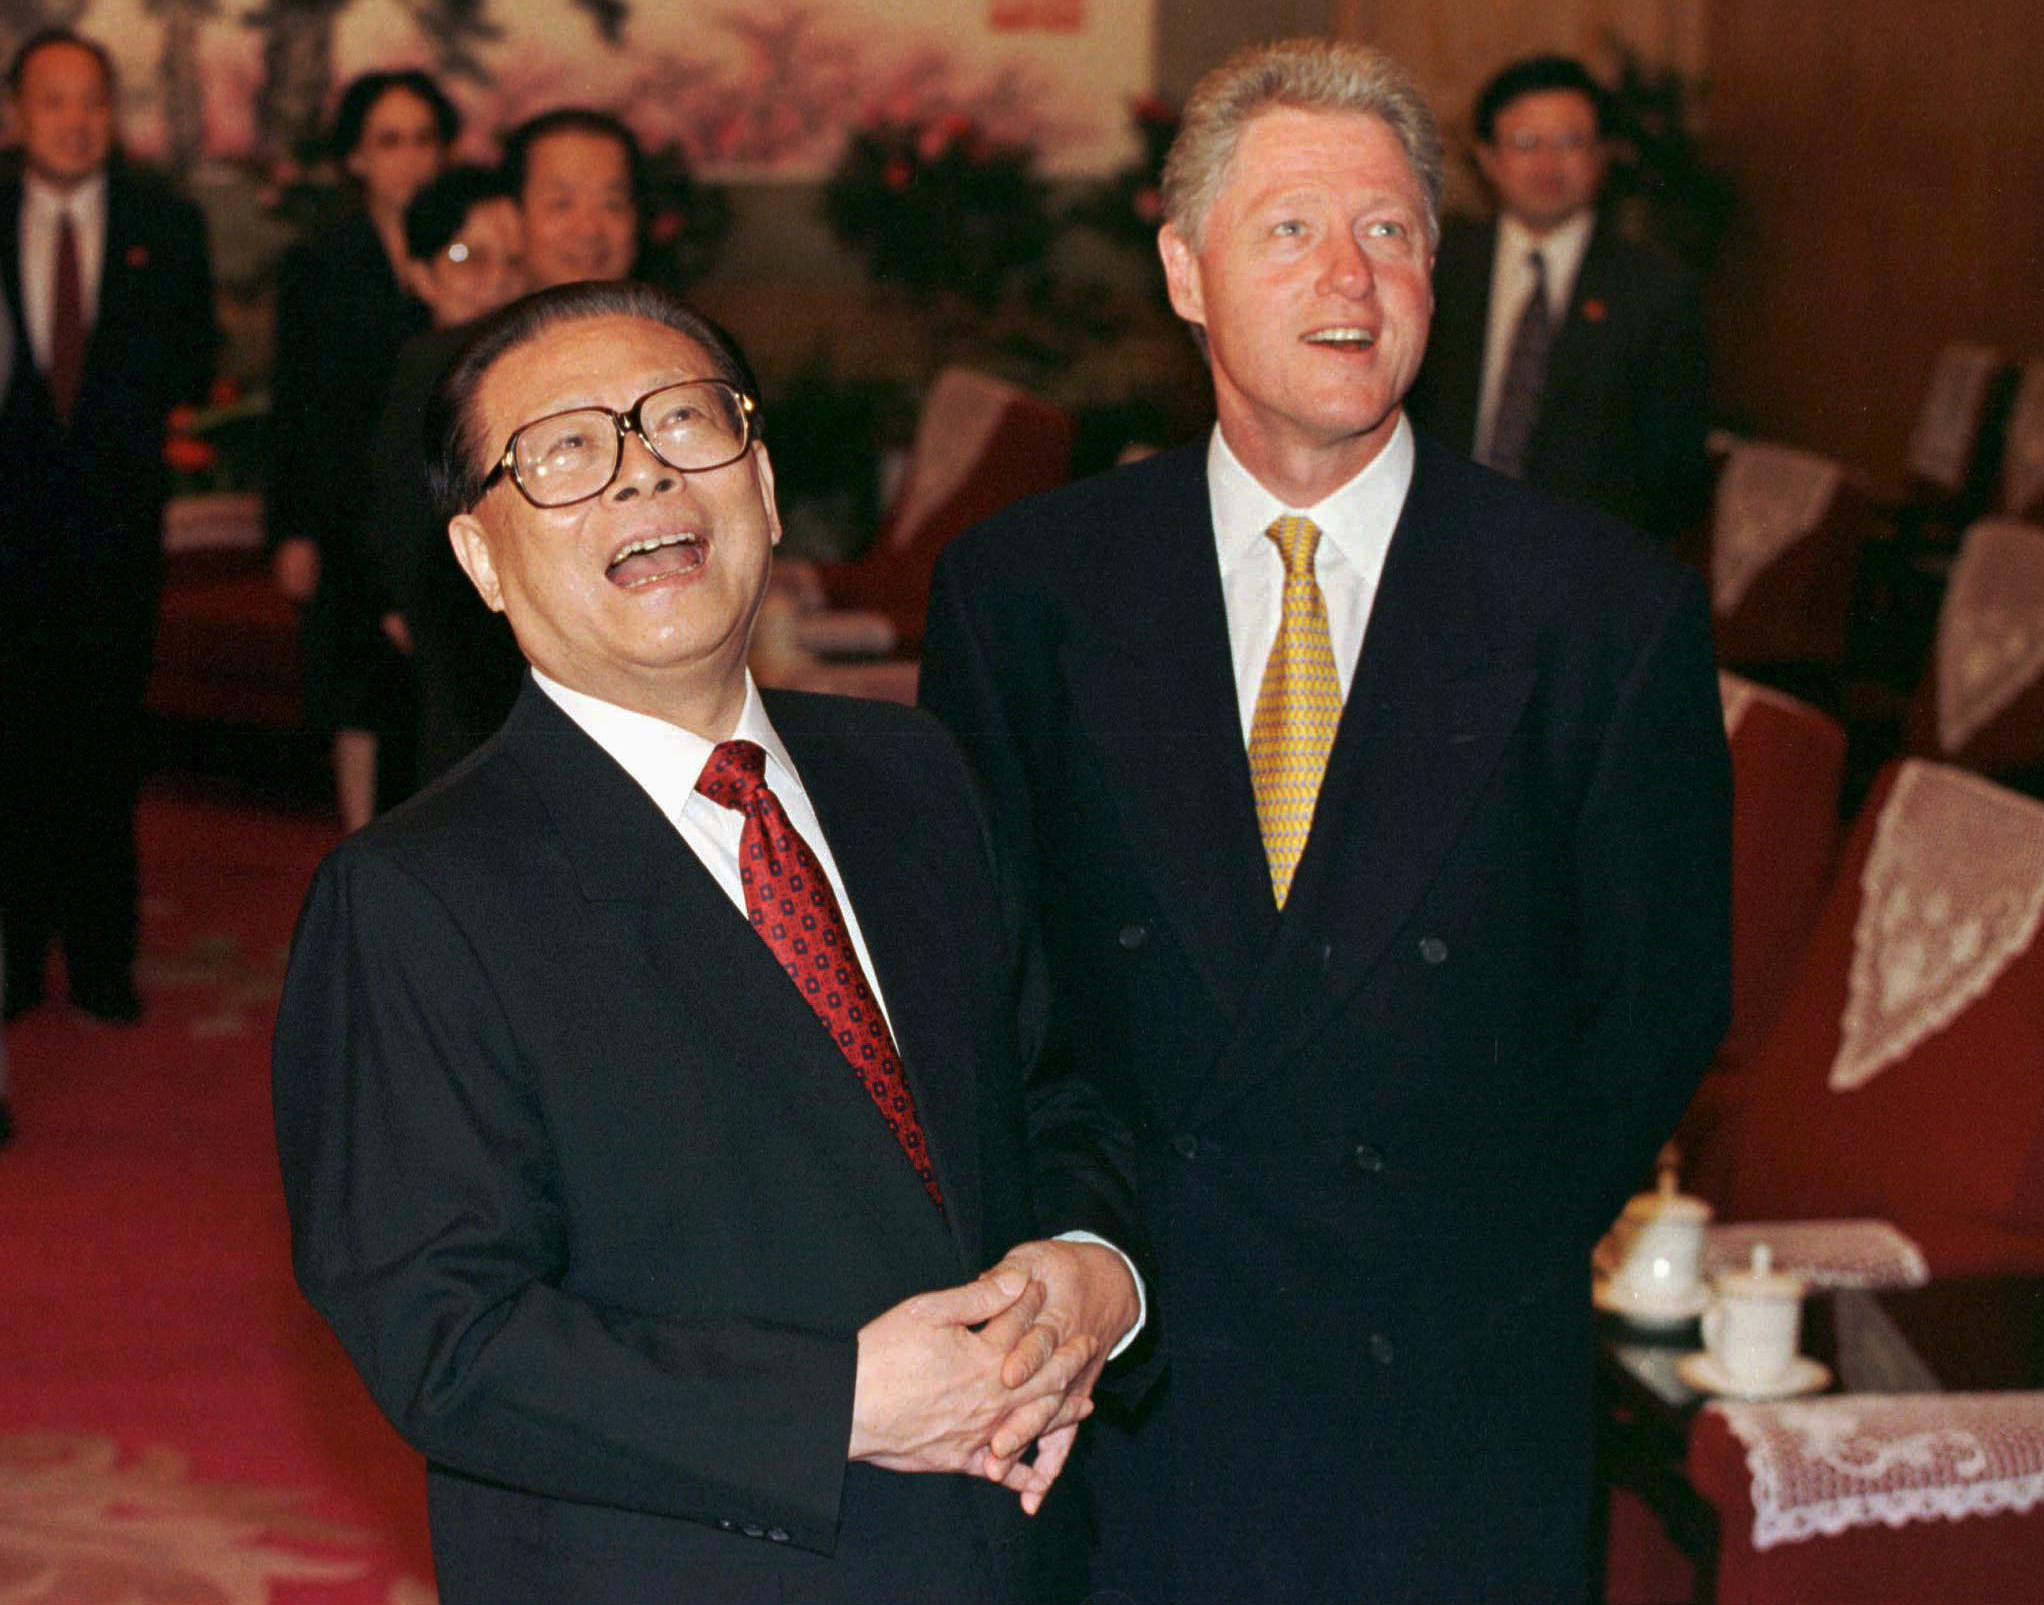 Former US president Bill Clinton meets with his Chinese counterpart, Jiang Zemin, during a visit to China in 1998. Photo: Reuters